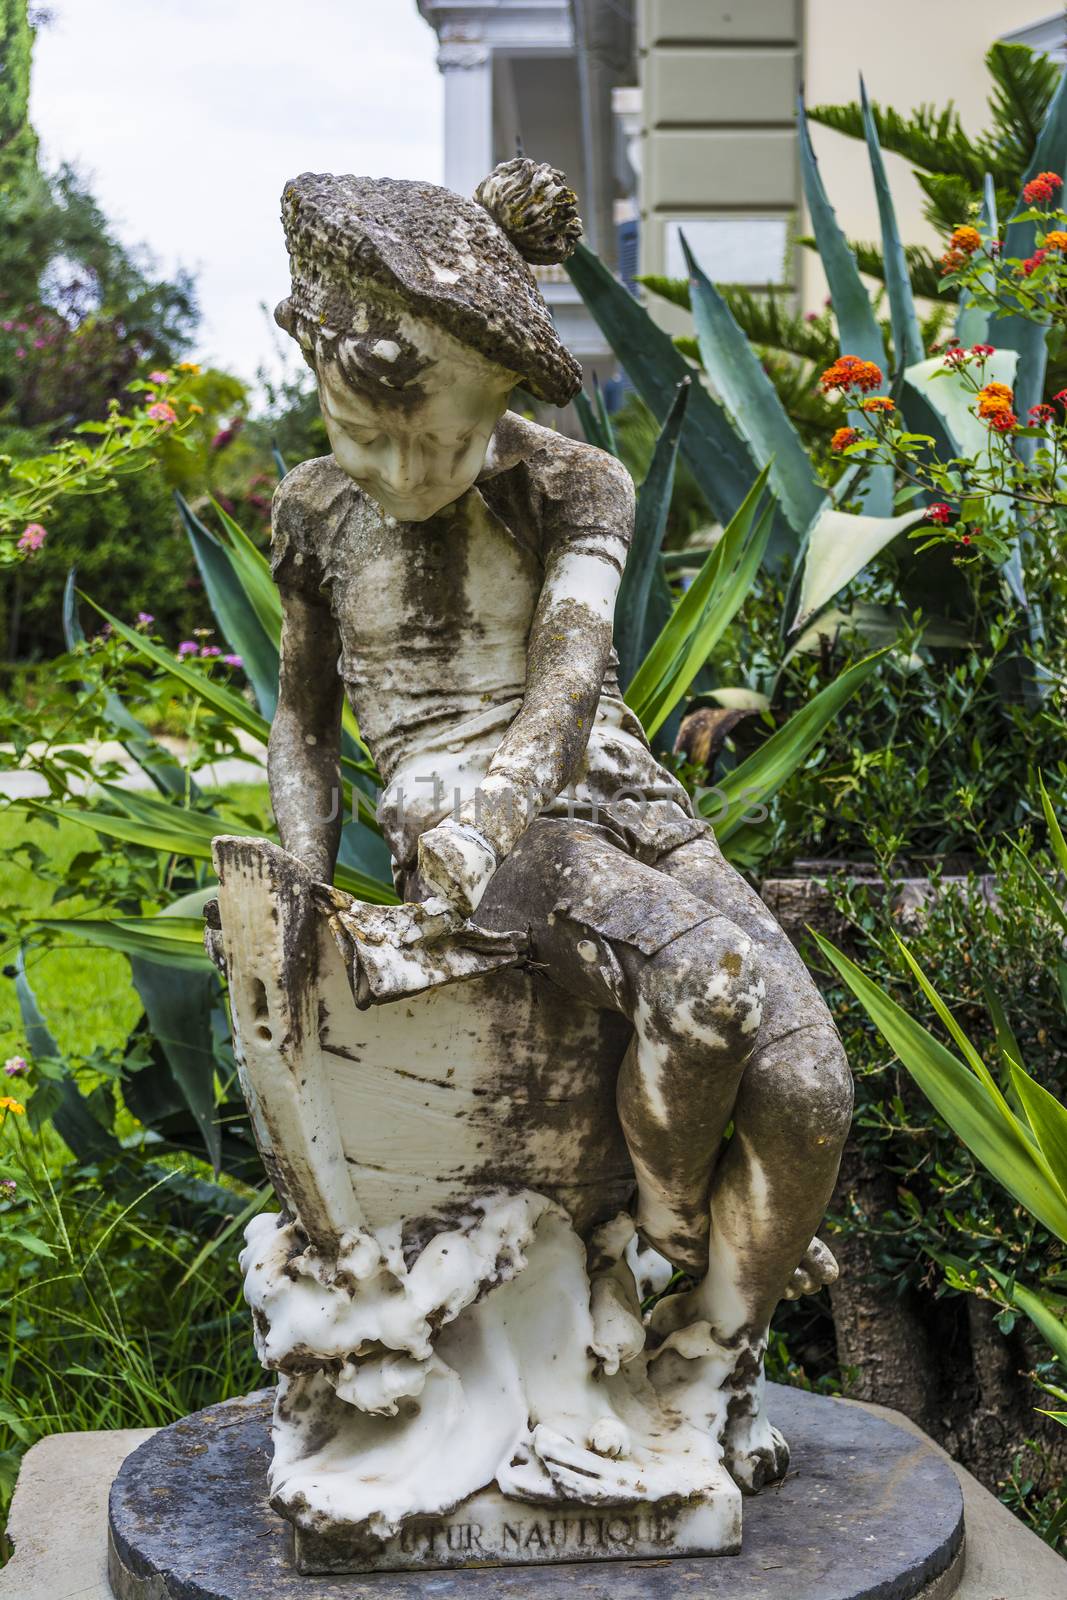 Small sculpture in Achilleion palace, Corfu by ankarb